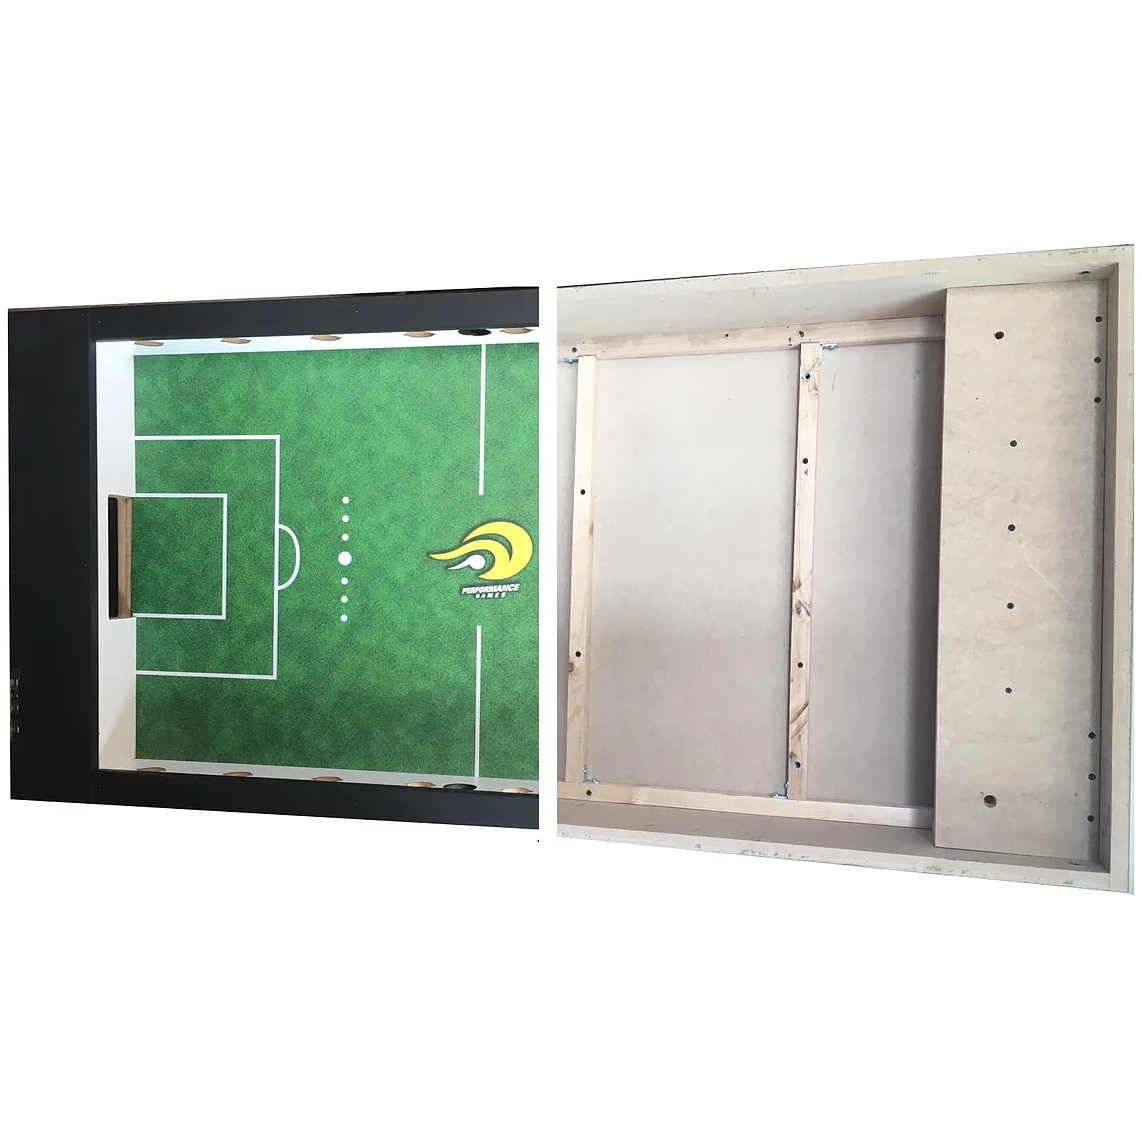 performance game sure shot rv foosball table view top and bottom of table